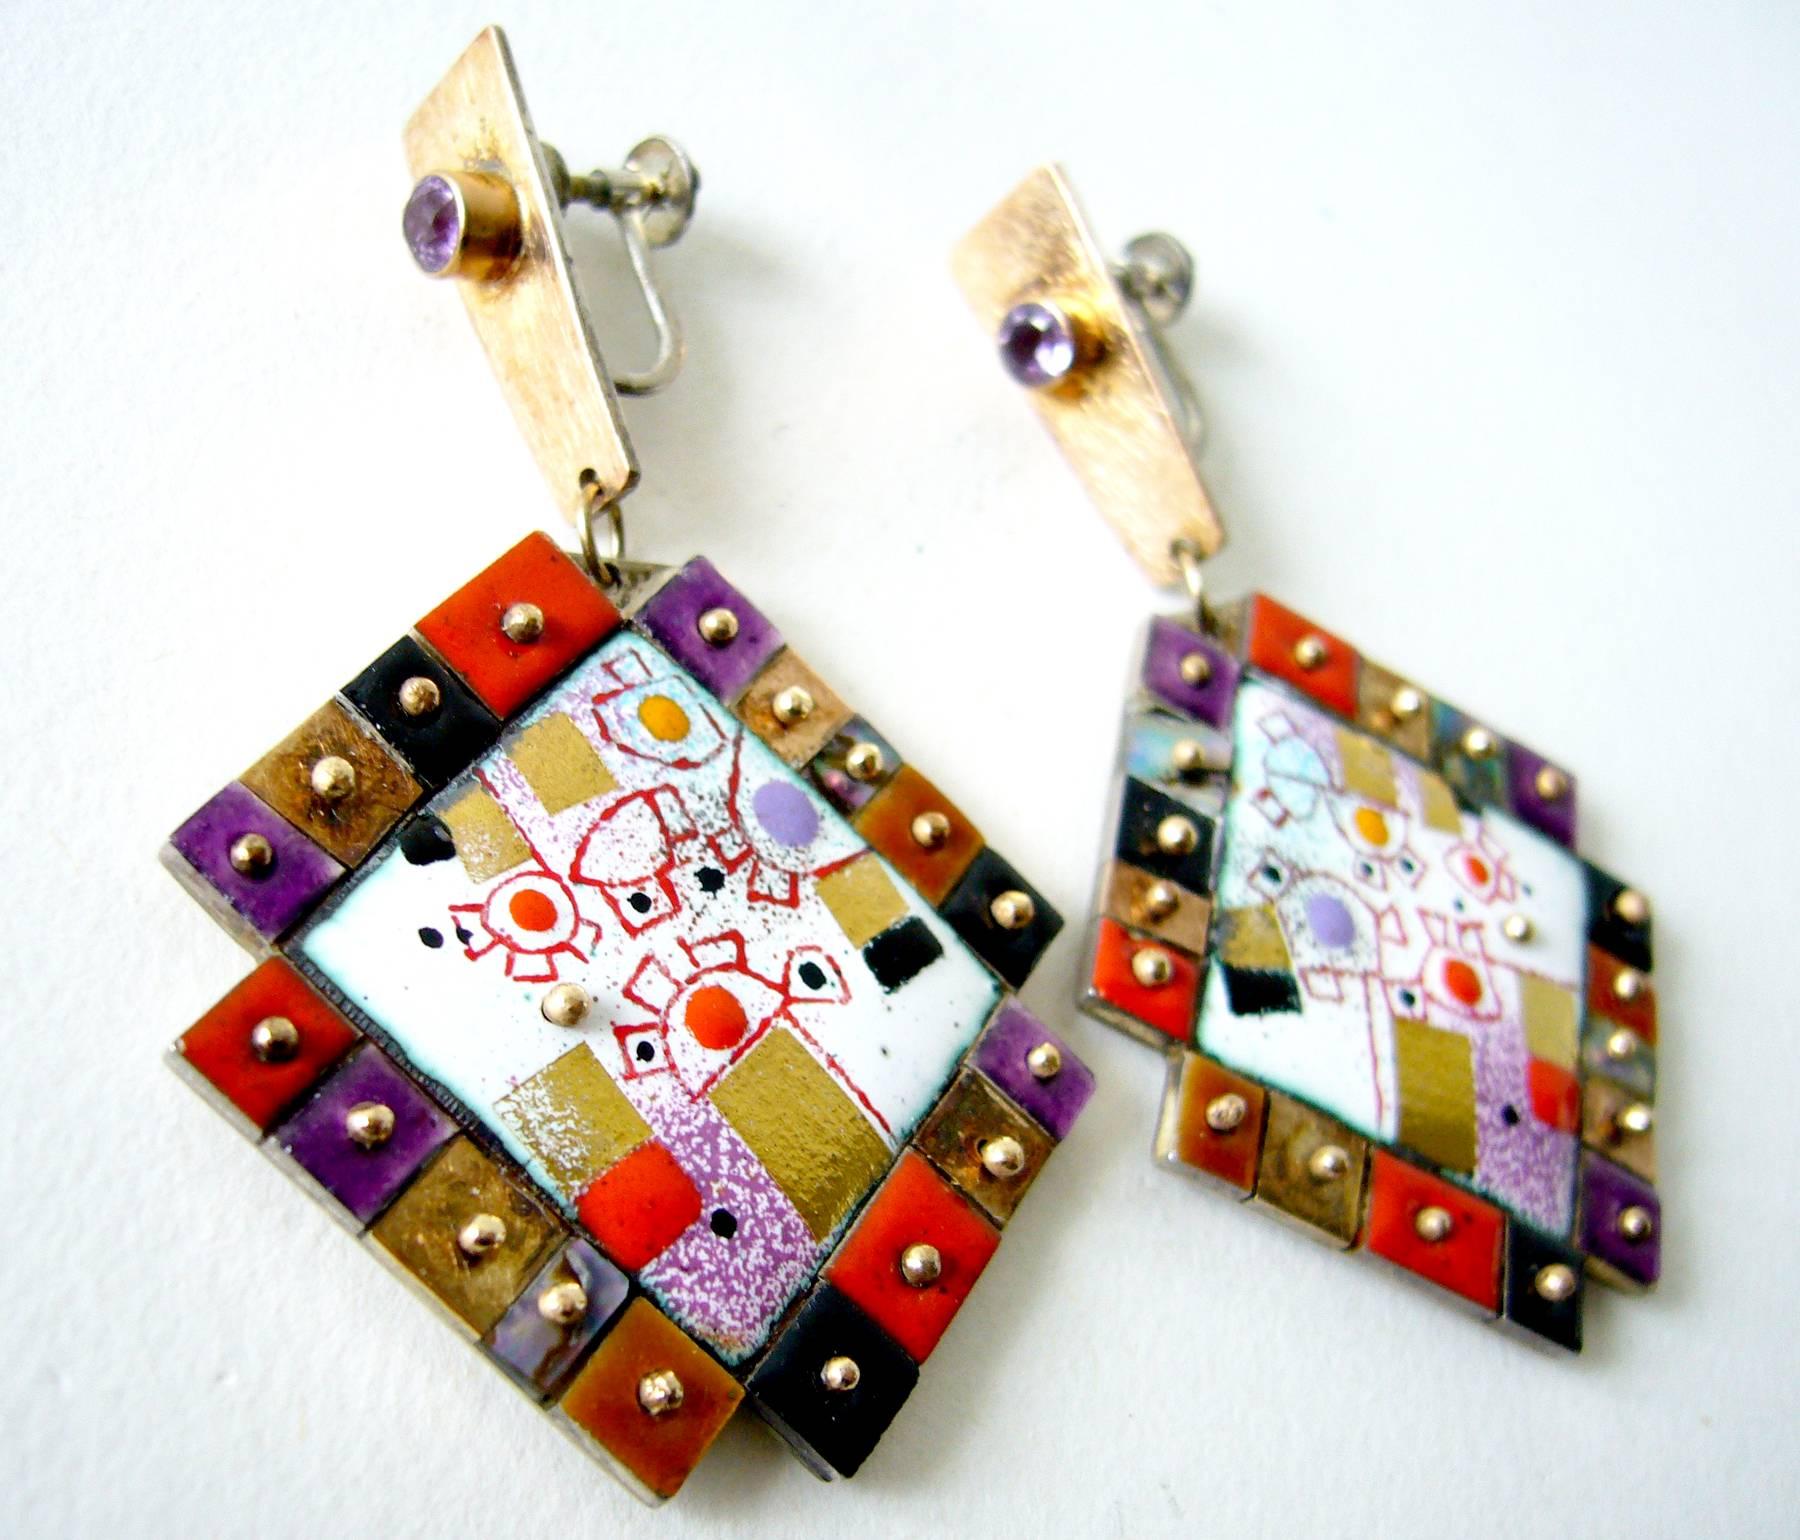 Colorful enamel mosaic earrings created by master jeweler Earl Pardon, circa 1987.  Earrings feature an enamel center panel of abstract design surrounded by small tiles of mother of pearl shell and enamel. These are attached with 14k gold studs and